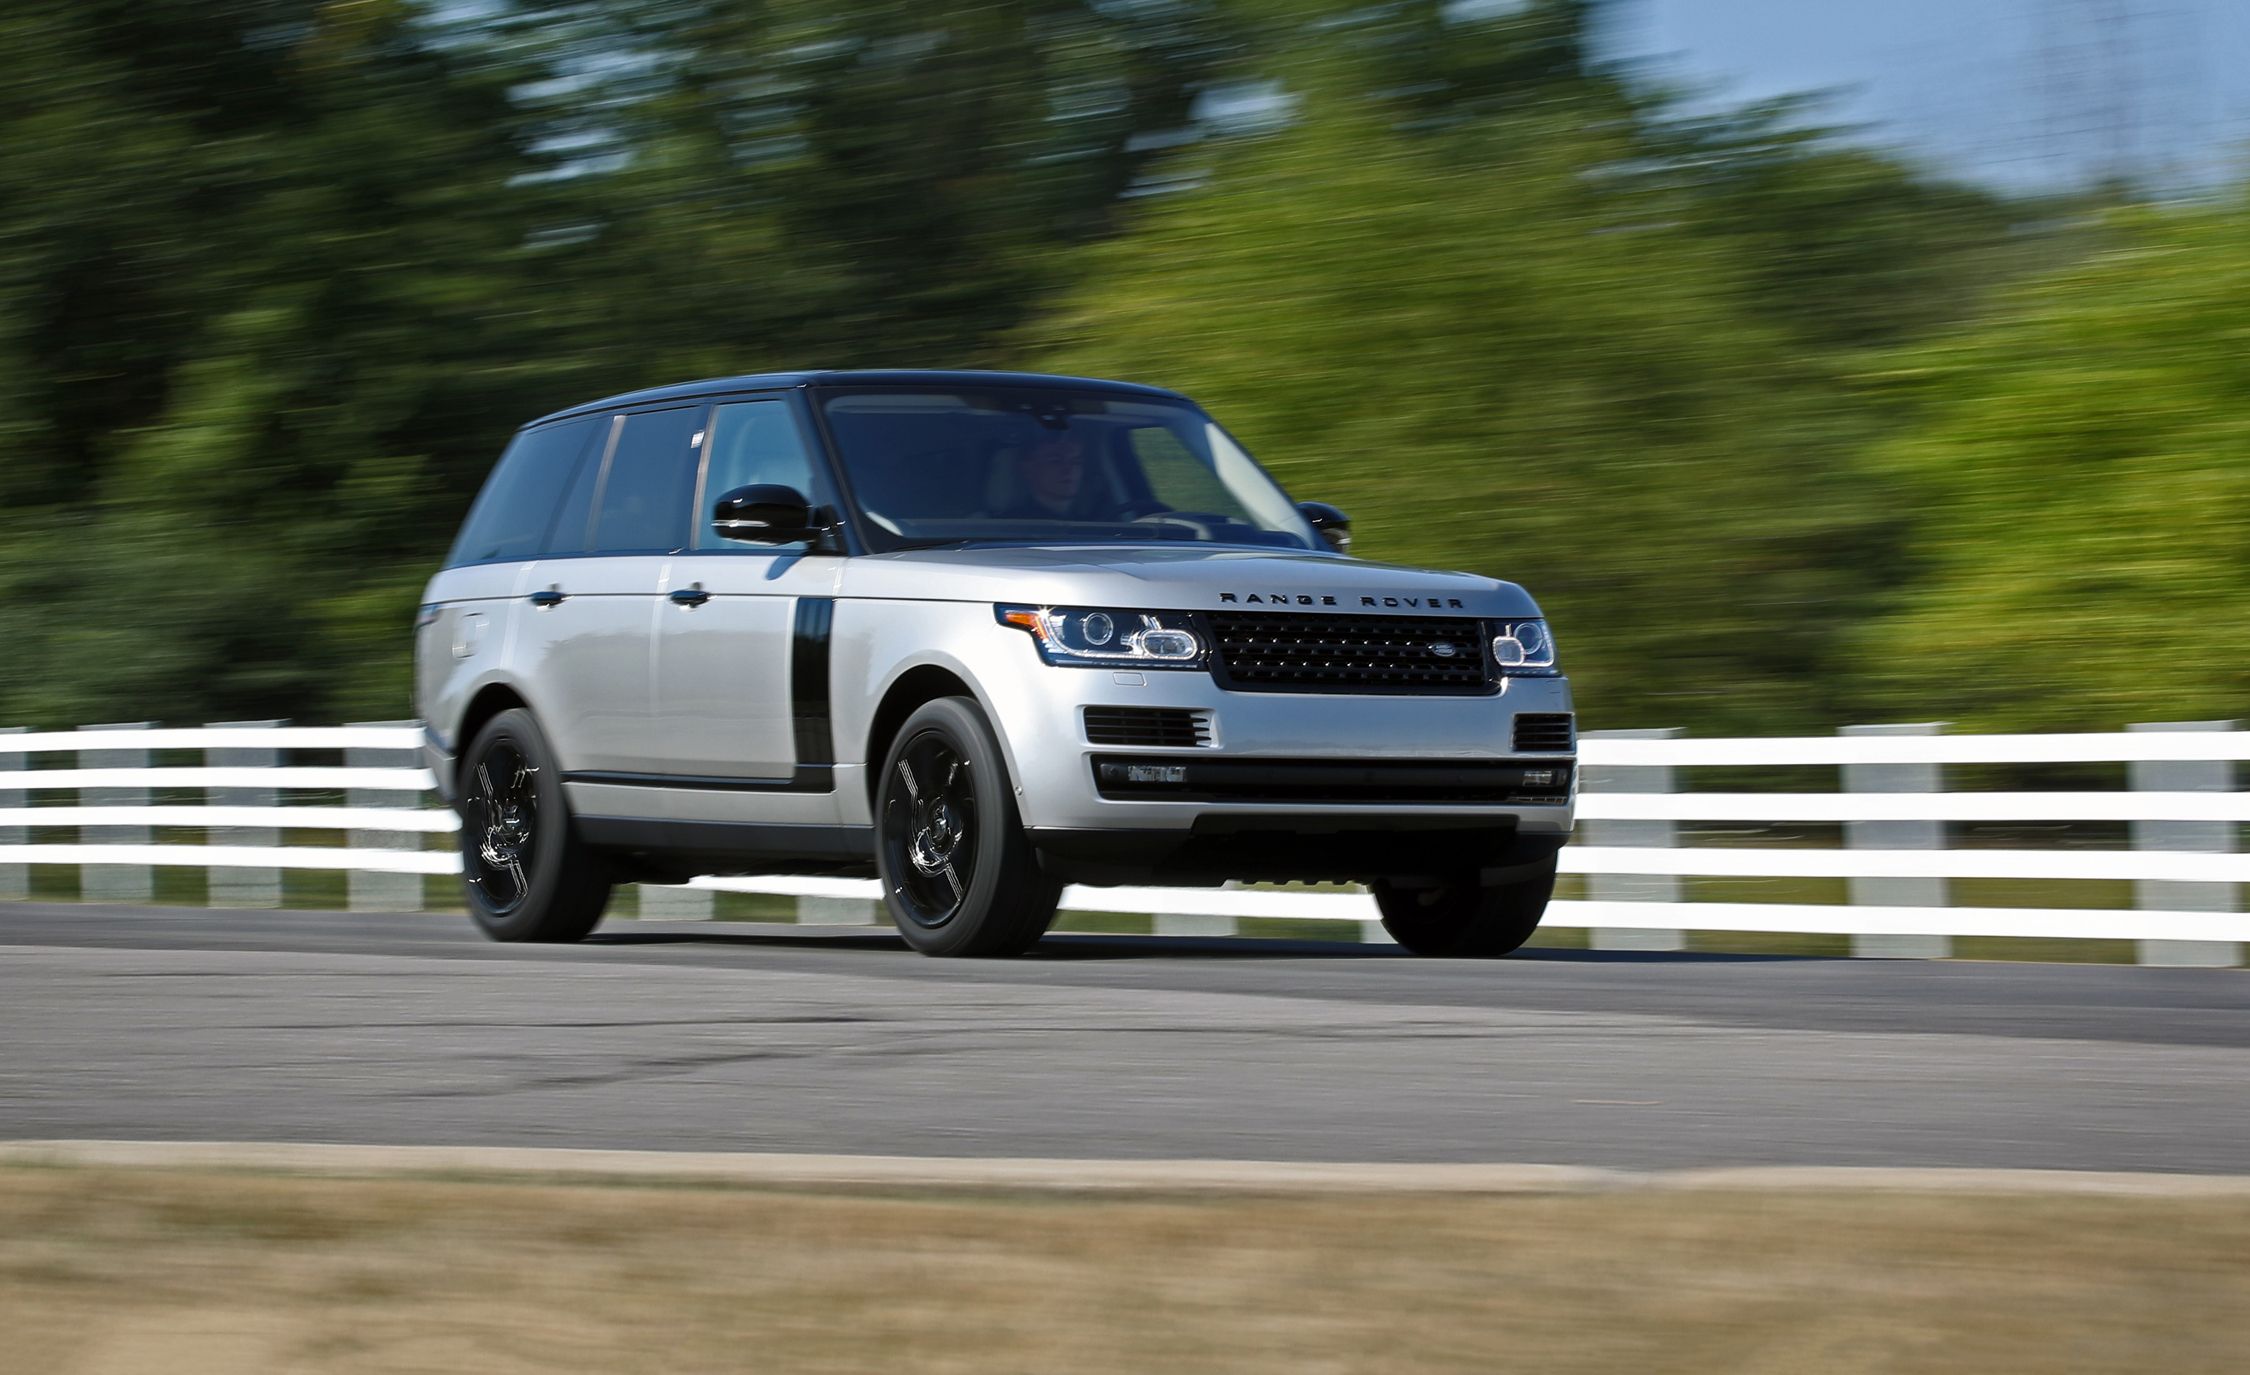 Land Rover Range Rover Supercharged Reviews | Land Rover Range Rover ...